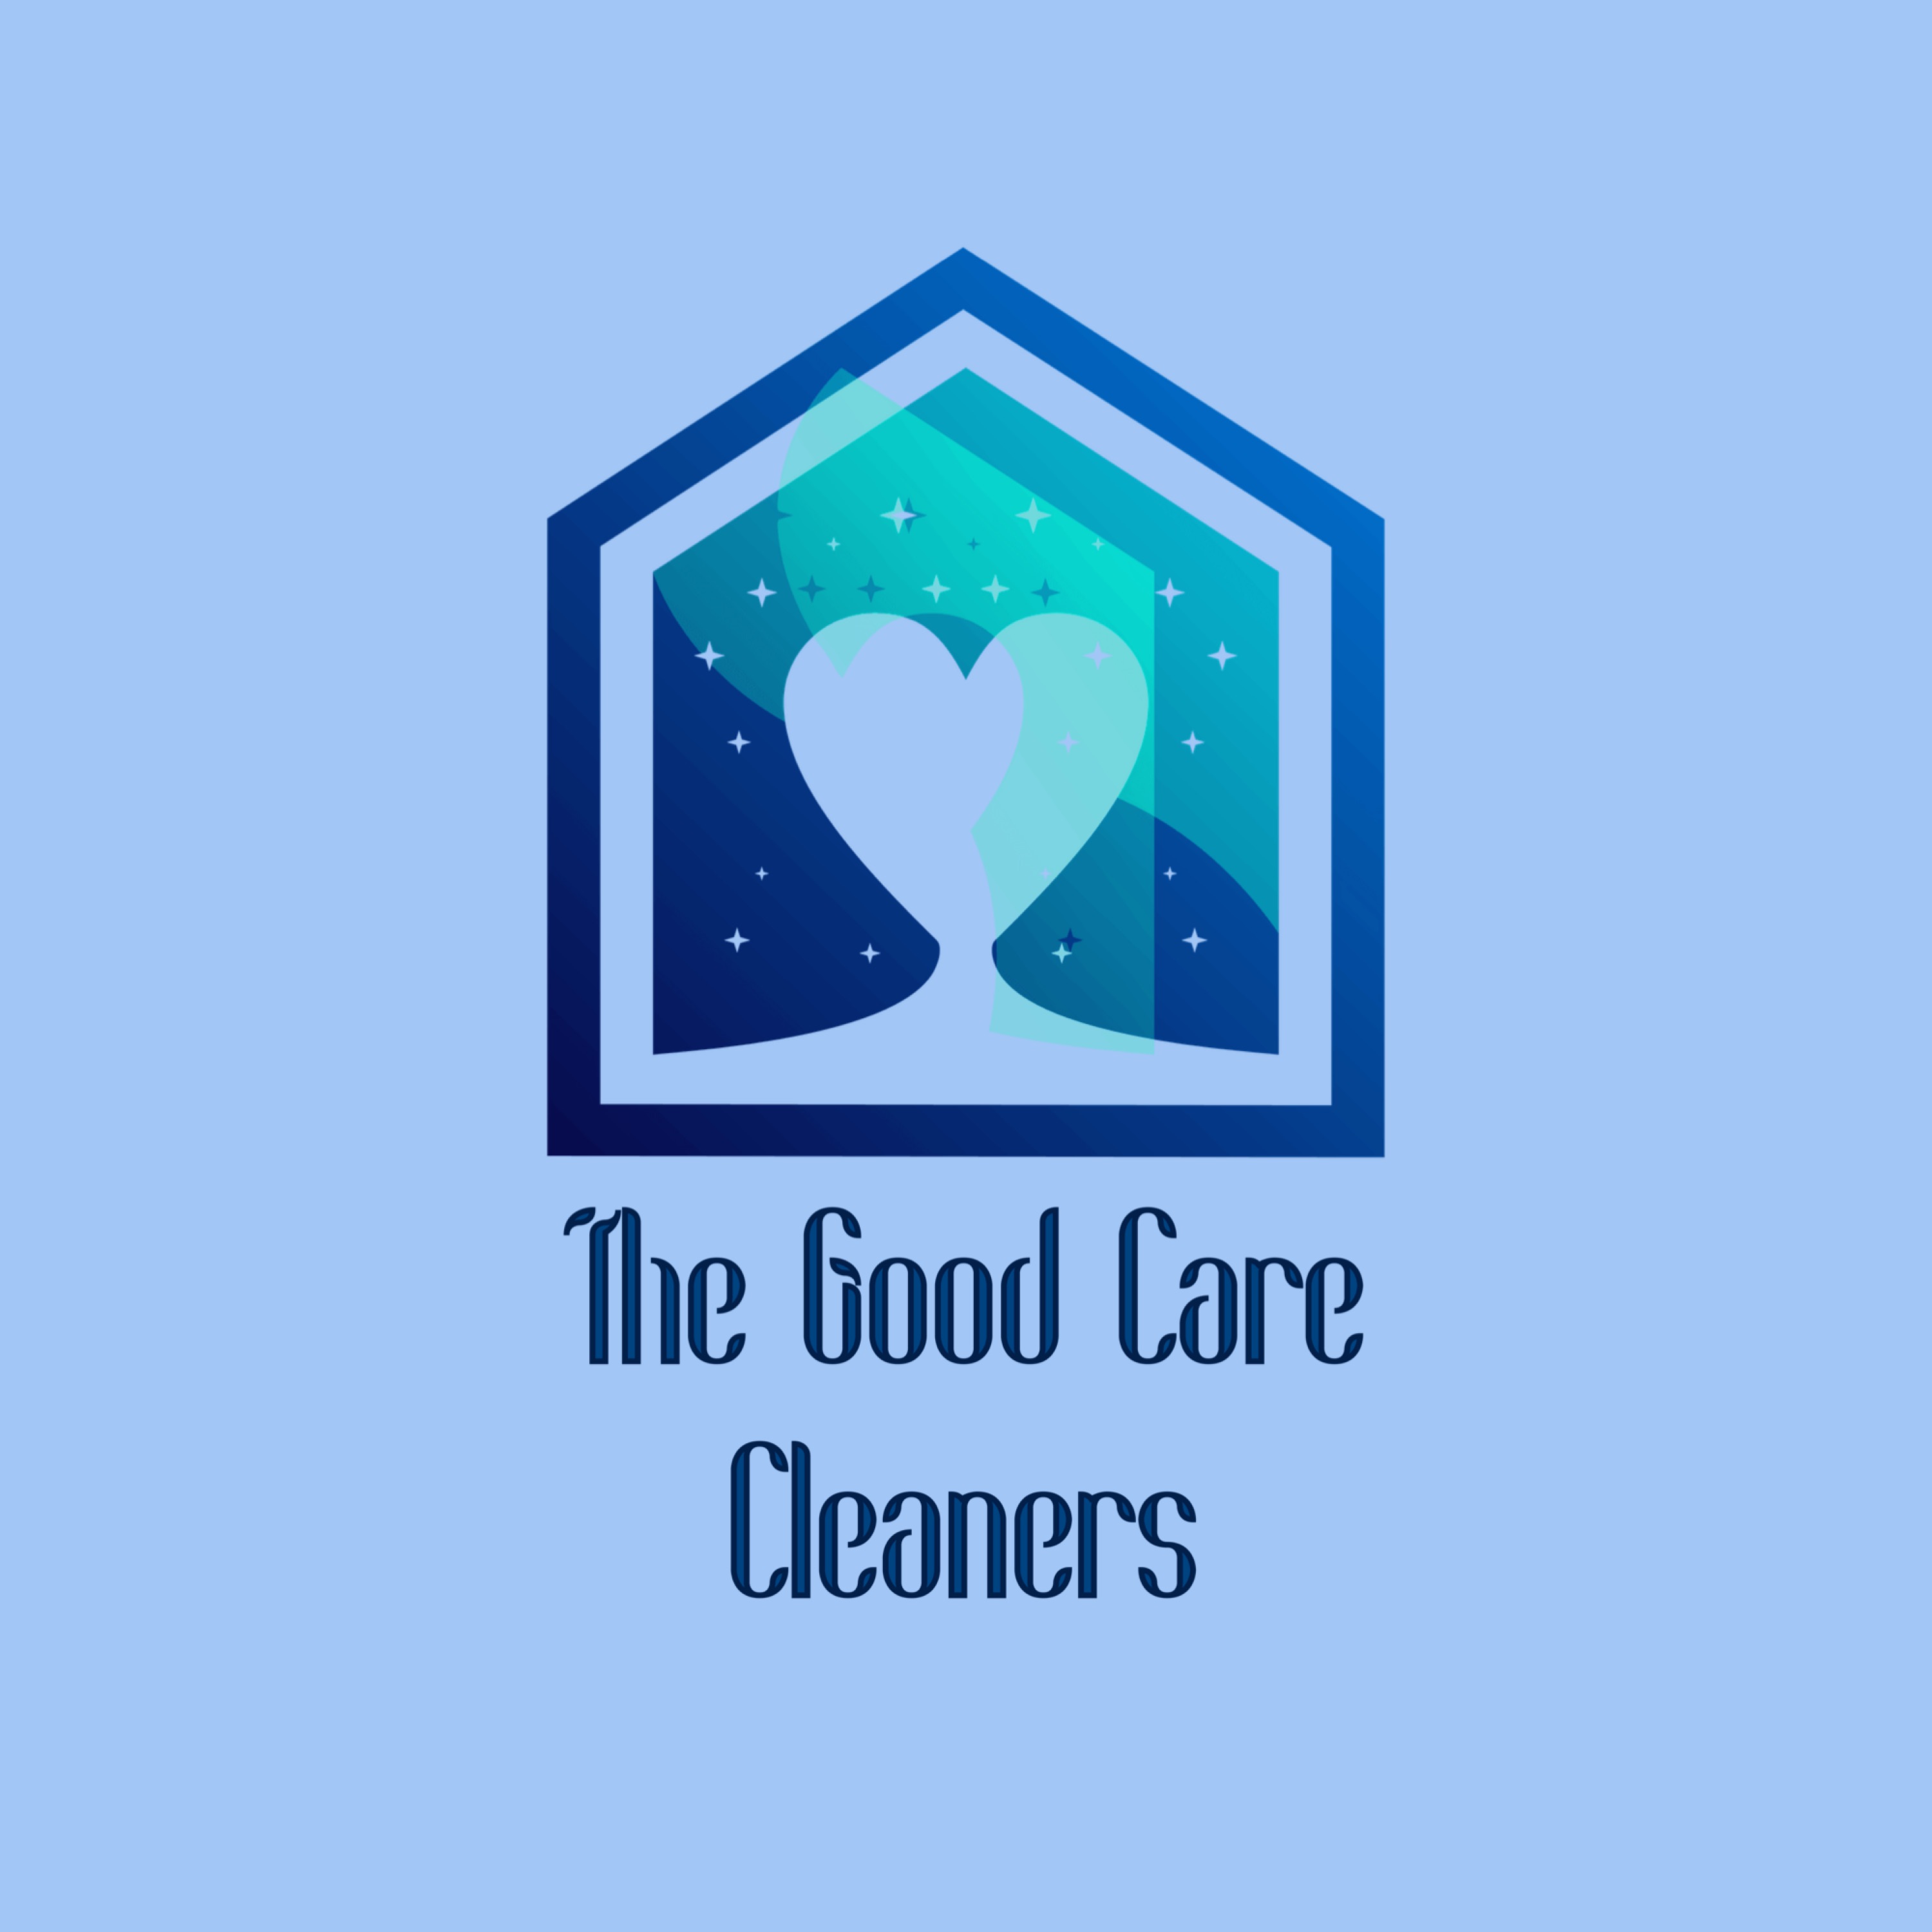 The Good Care Cleaners Logo